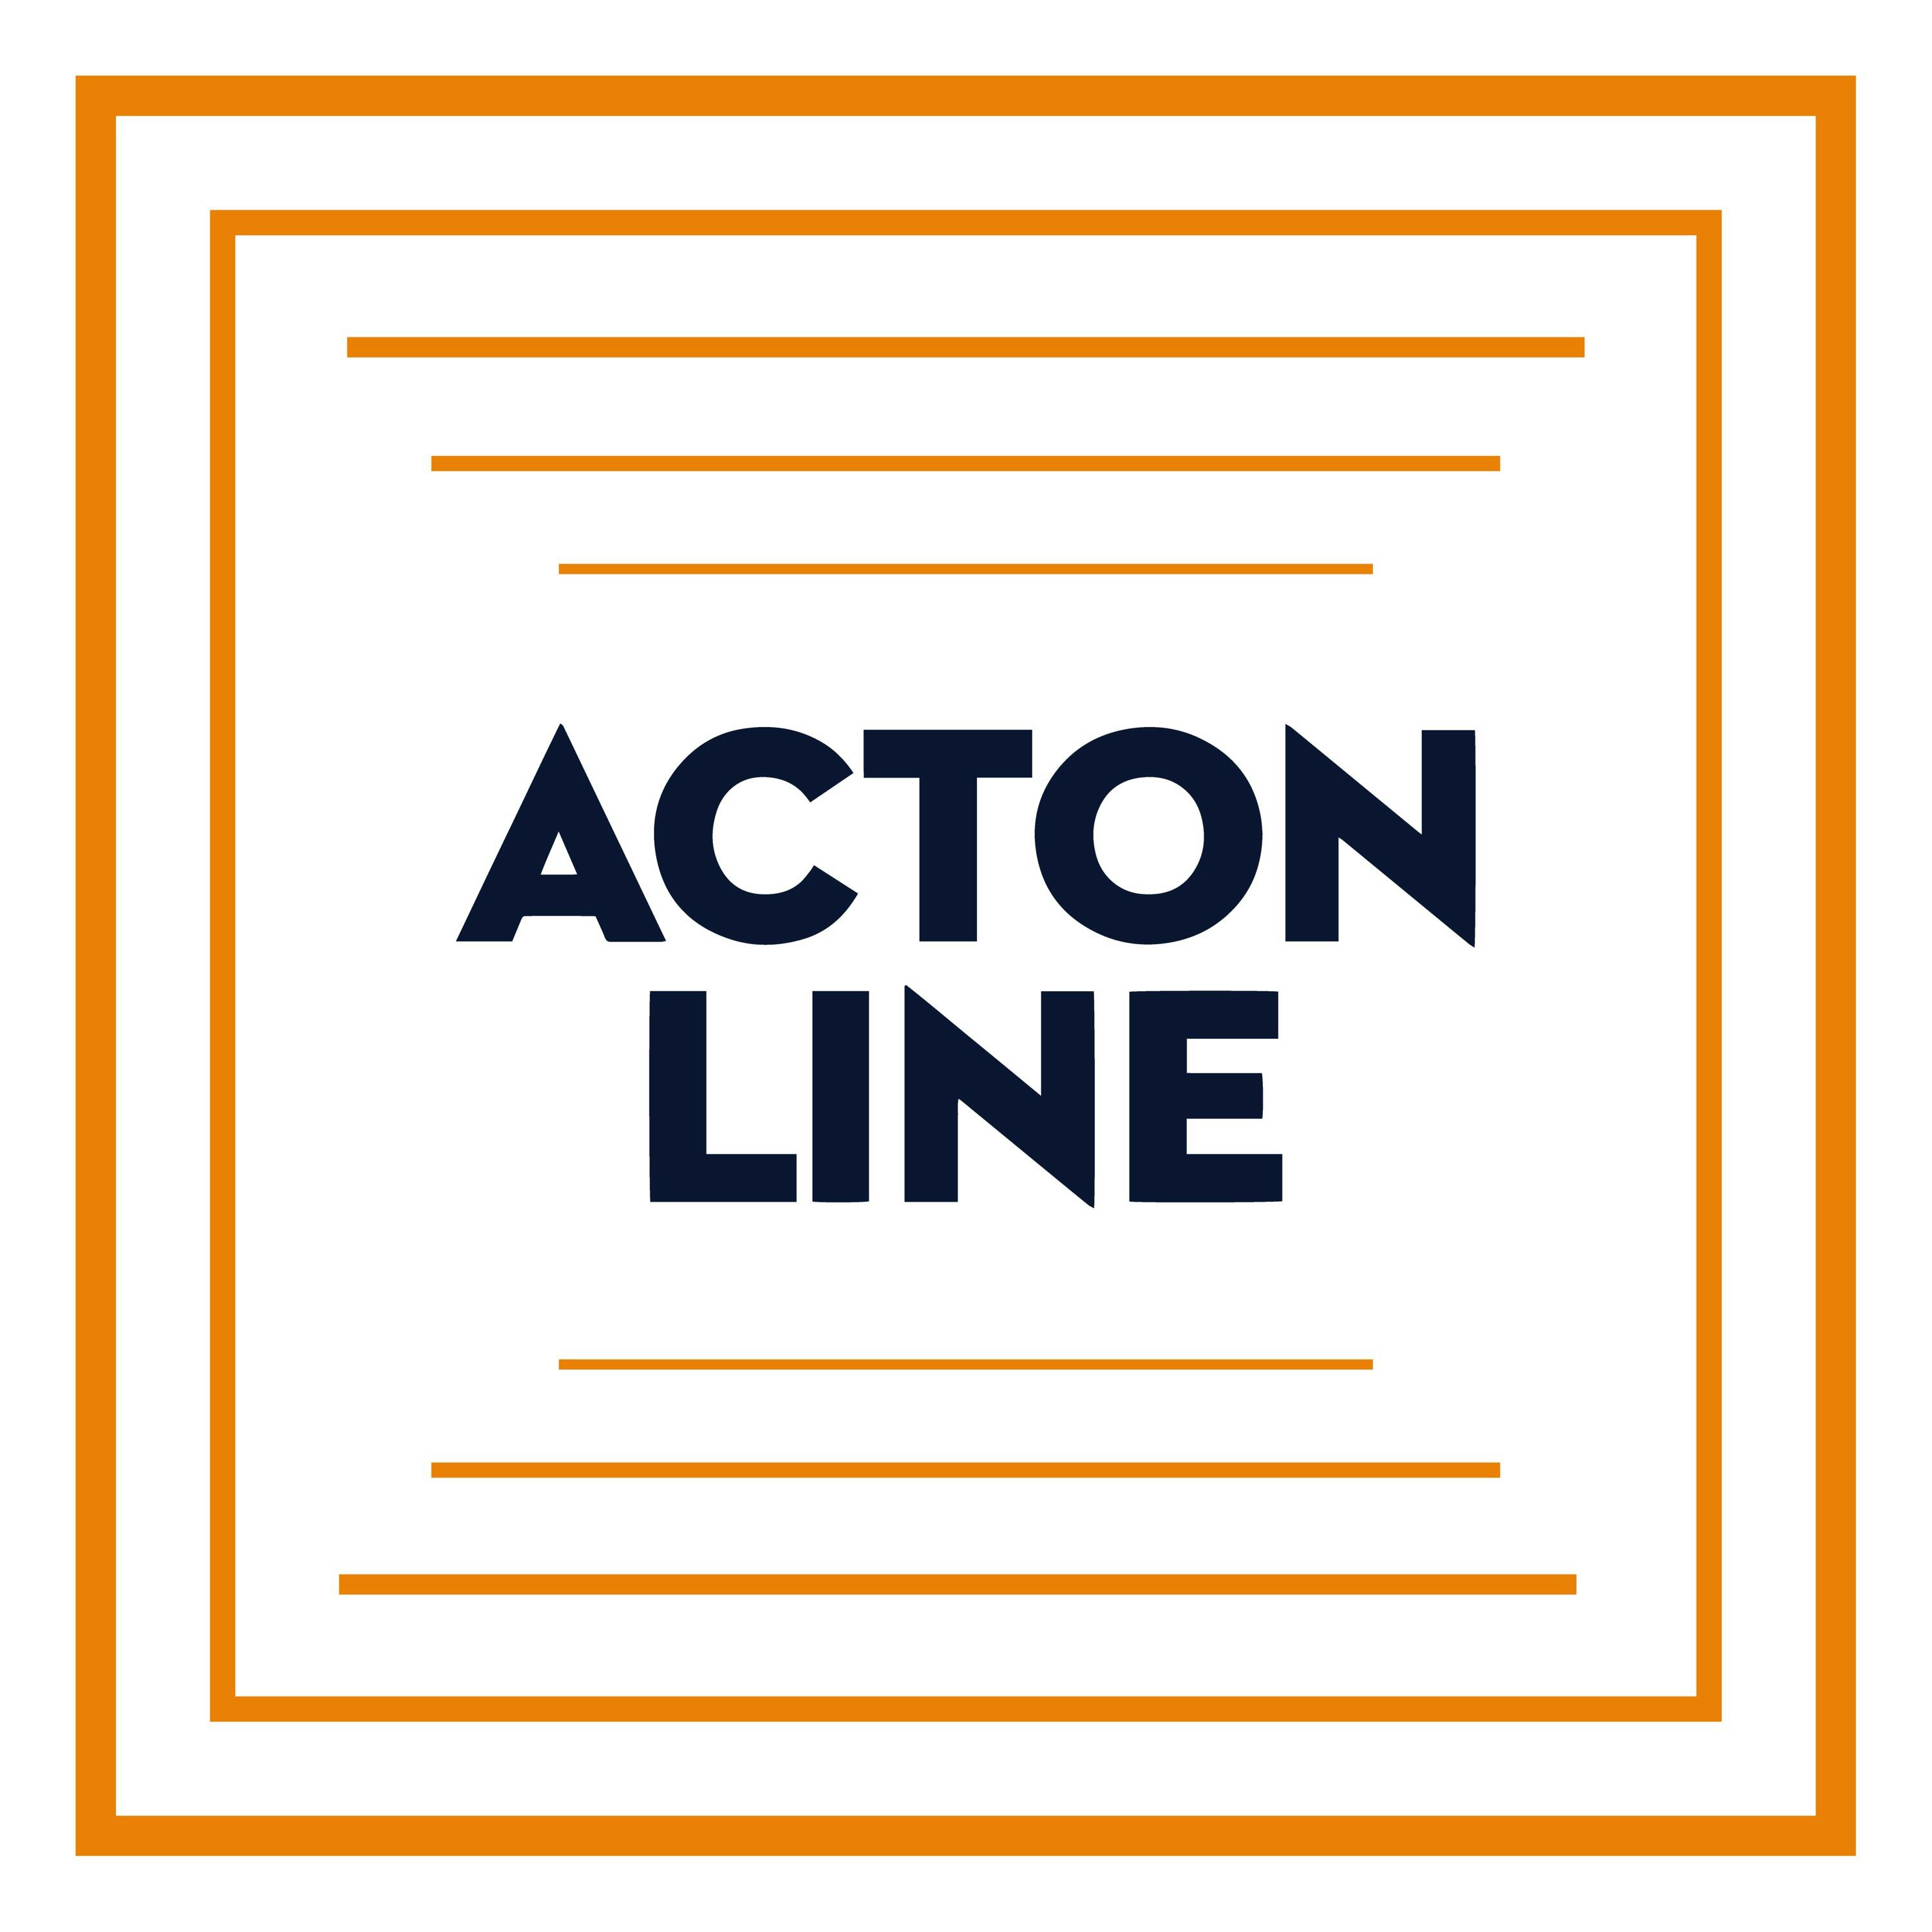 Mission and core principles of the Acton Institute, Part One